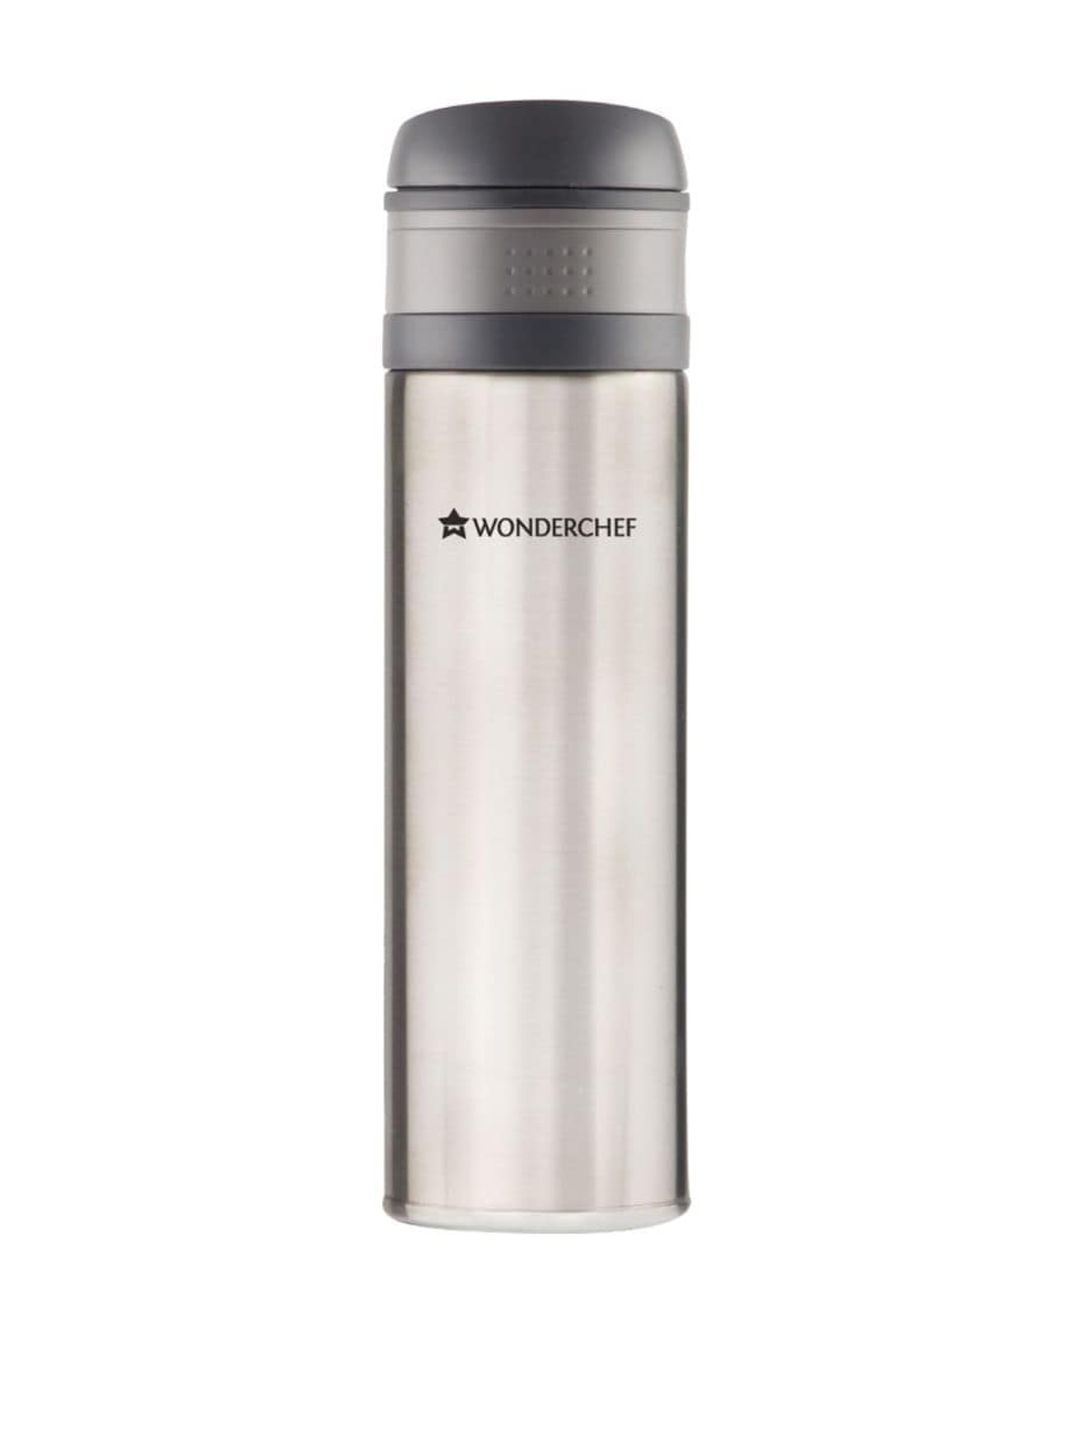 Wonderchef Silver-Toned Solid Stainless Steel Double Wall Vacuum Insulated Flask 500ml Price in India